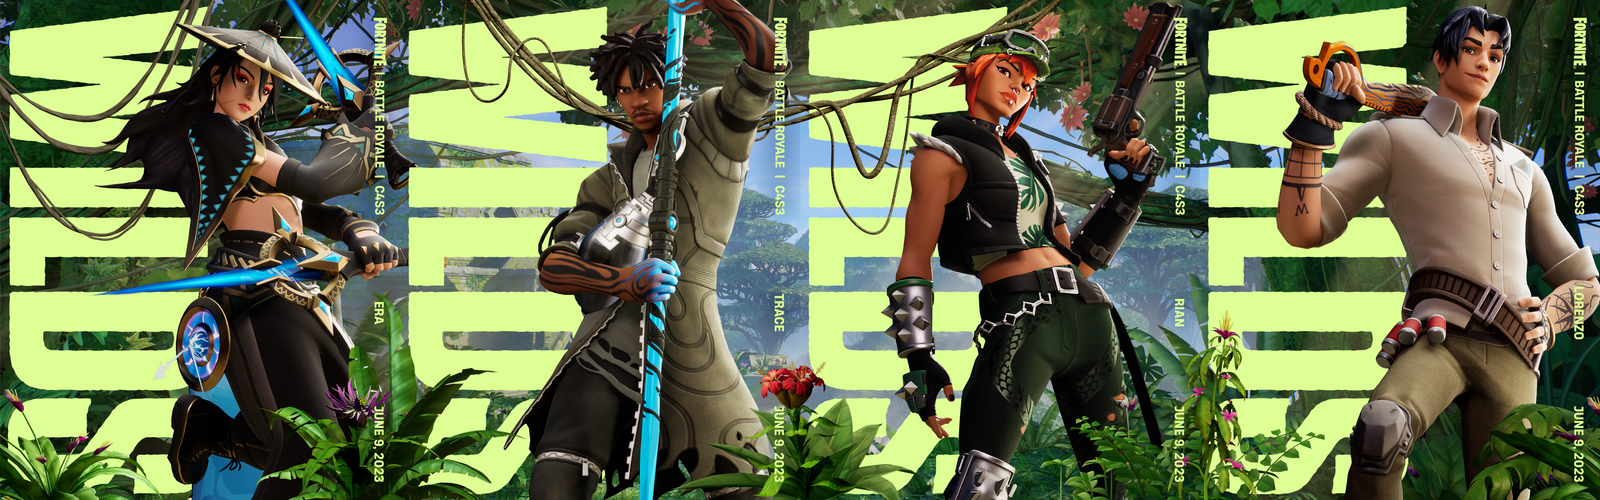 Fortnite WILDS: All Battle Pass Outfits Revealed